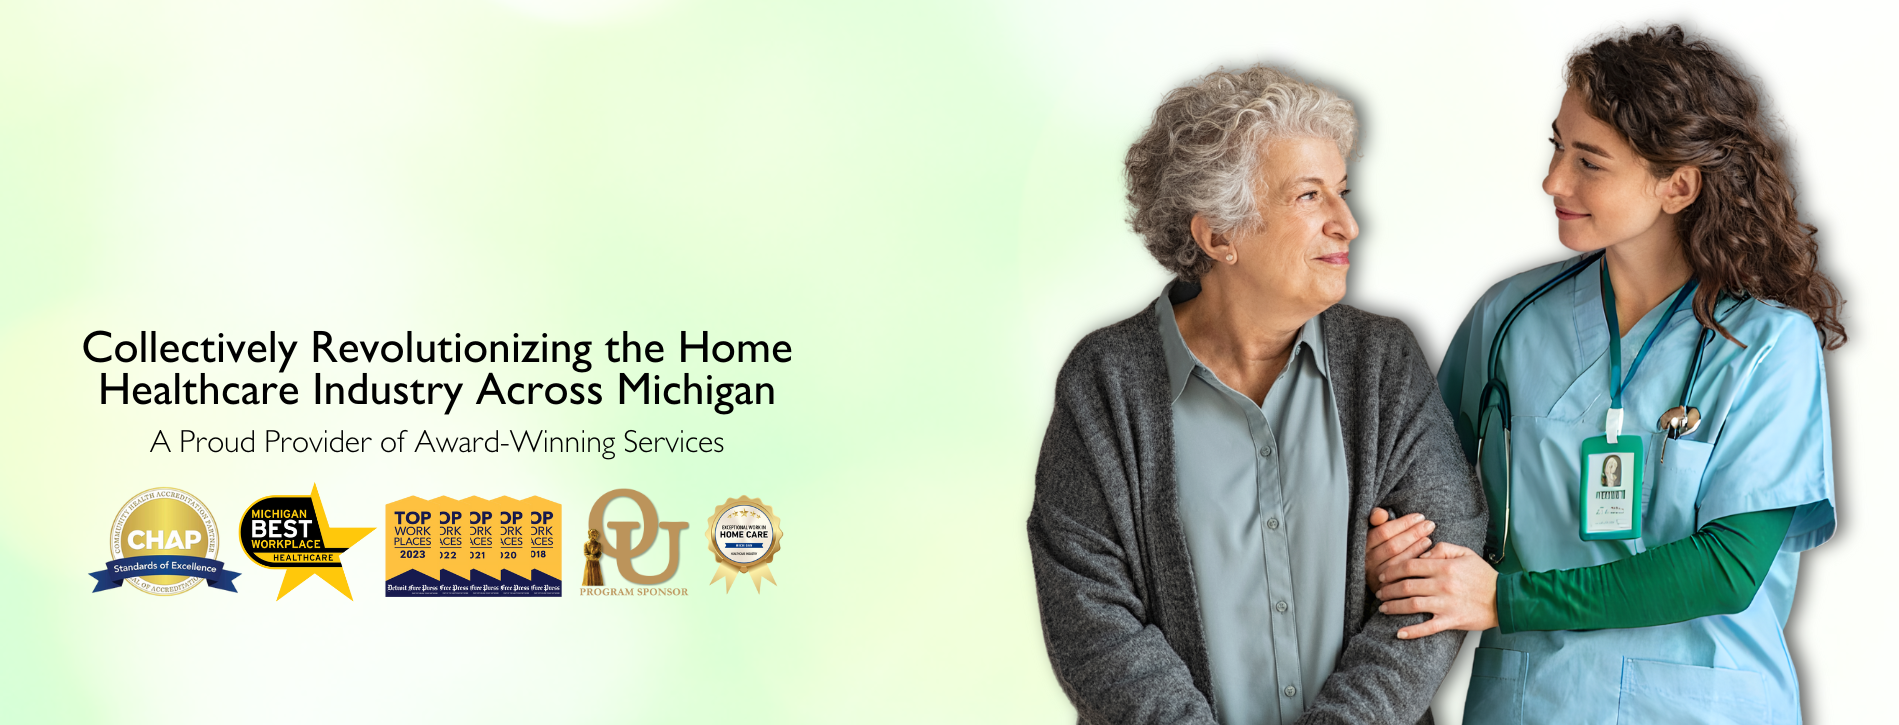 Collectively Revolutionizing the Home Healthcare Industry Across Michigan